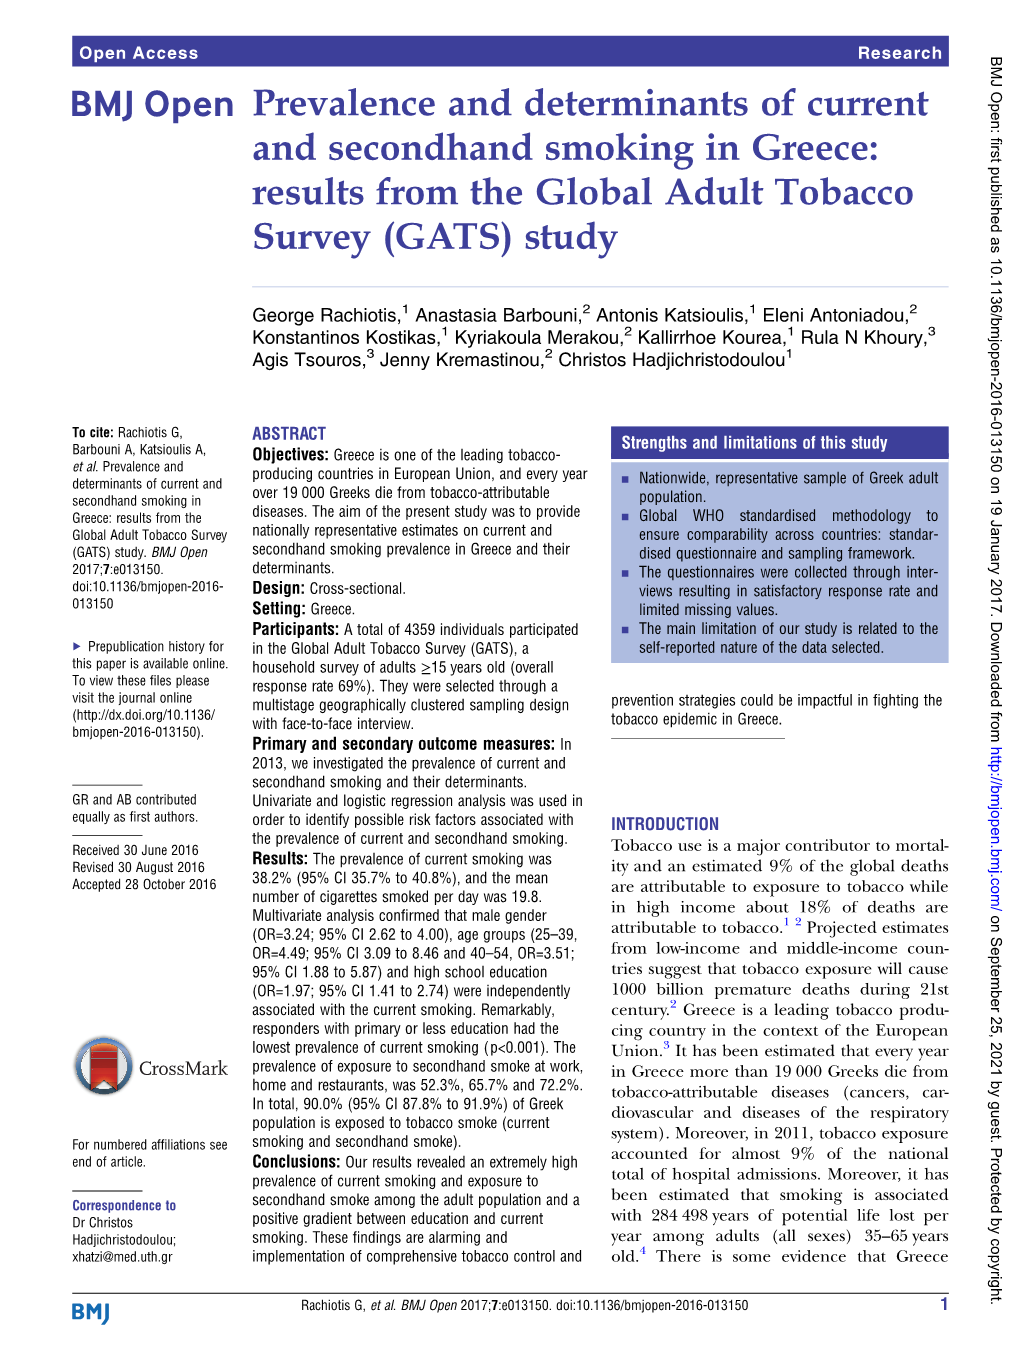 Results from the Global Adult Tobacco Survey (GATS) Study